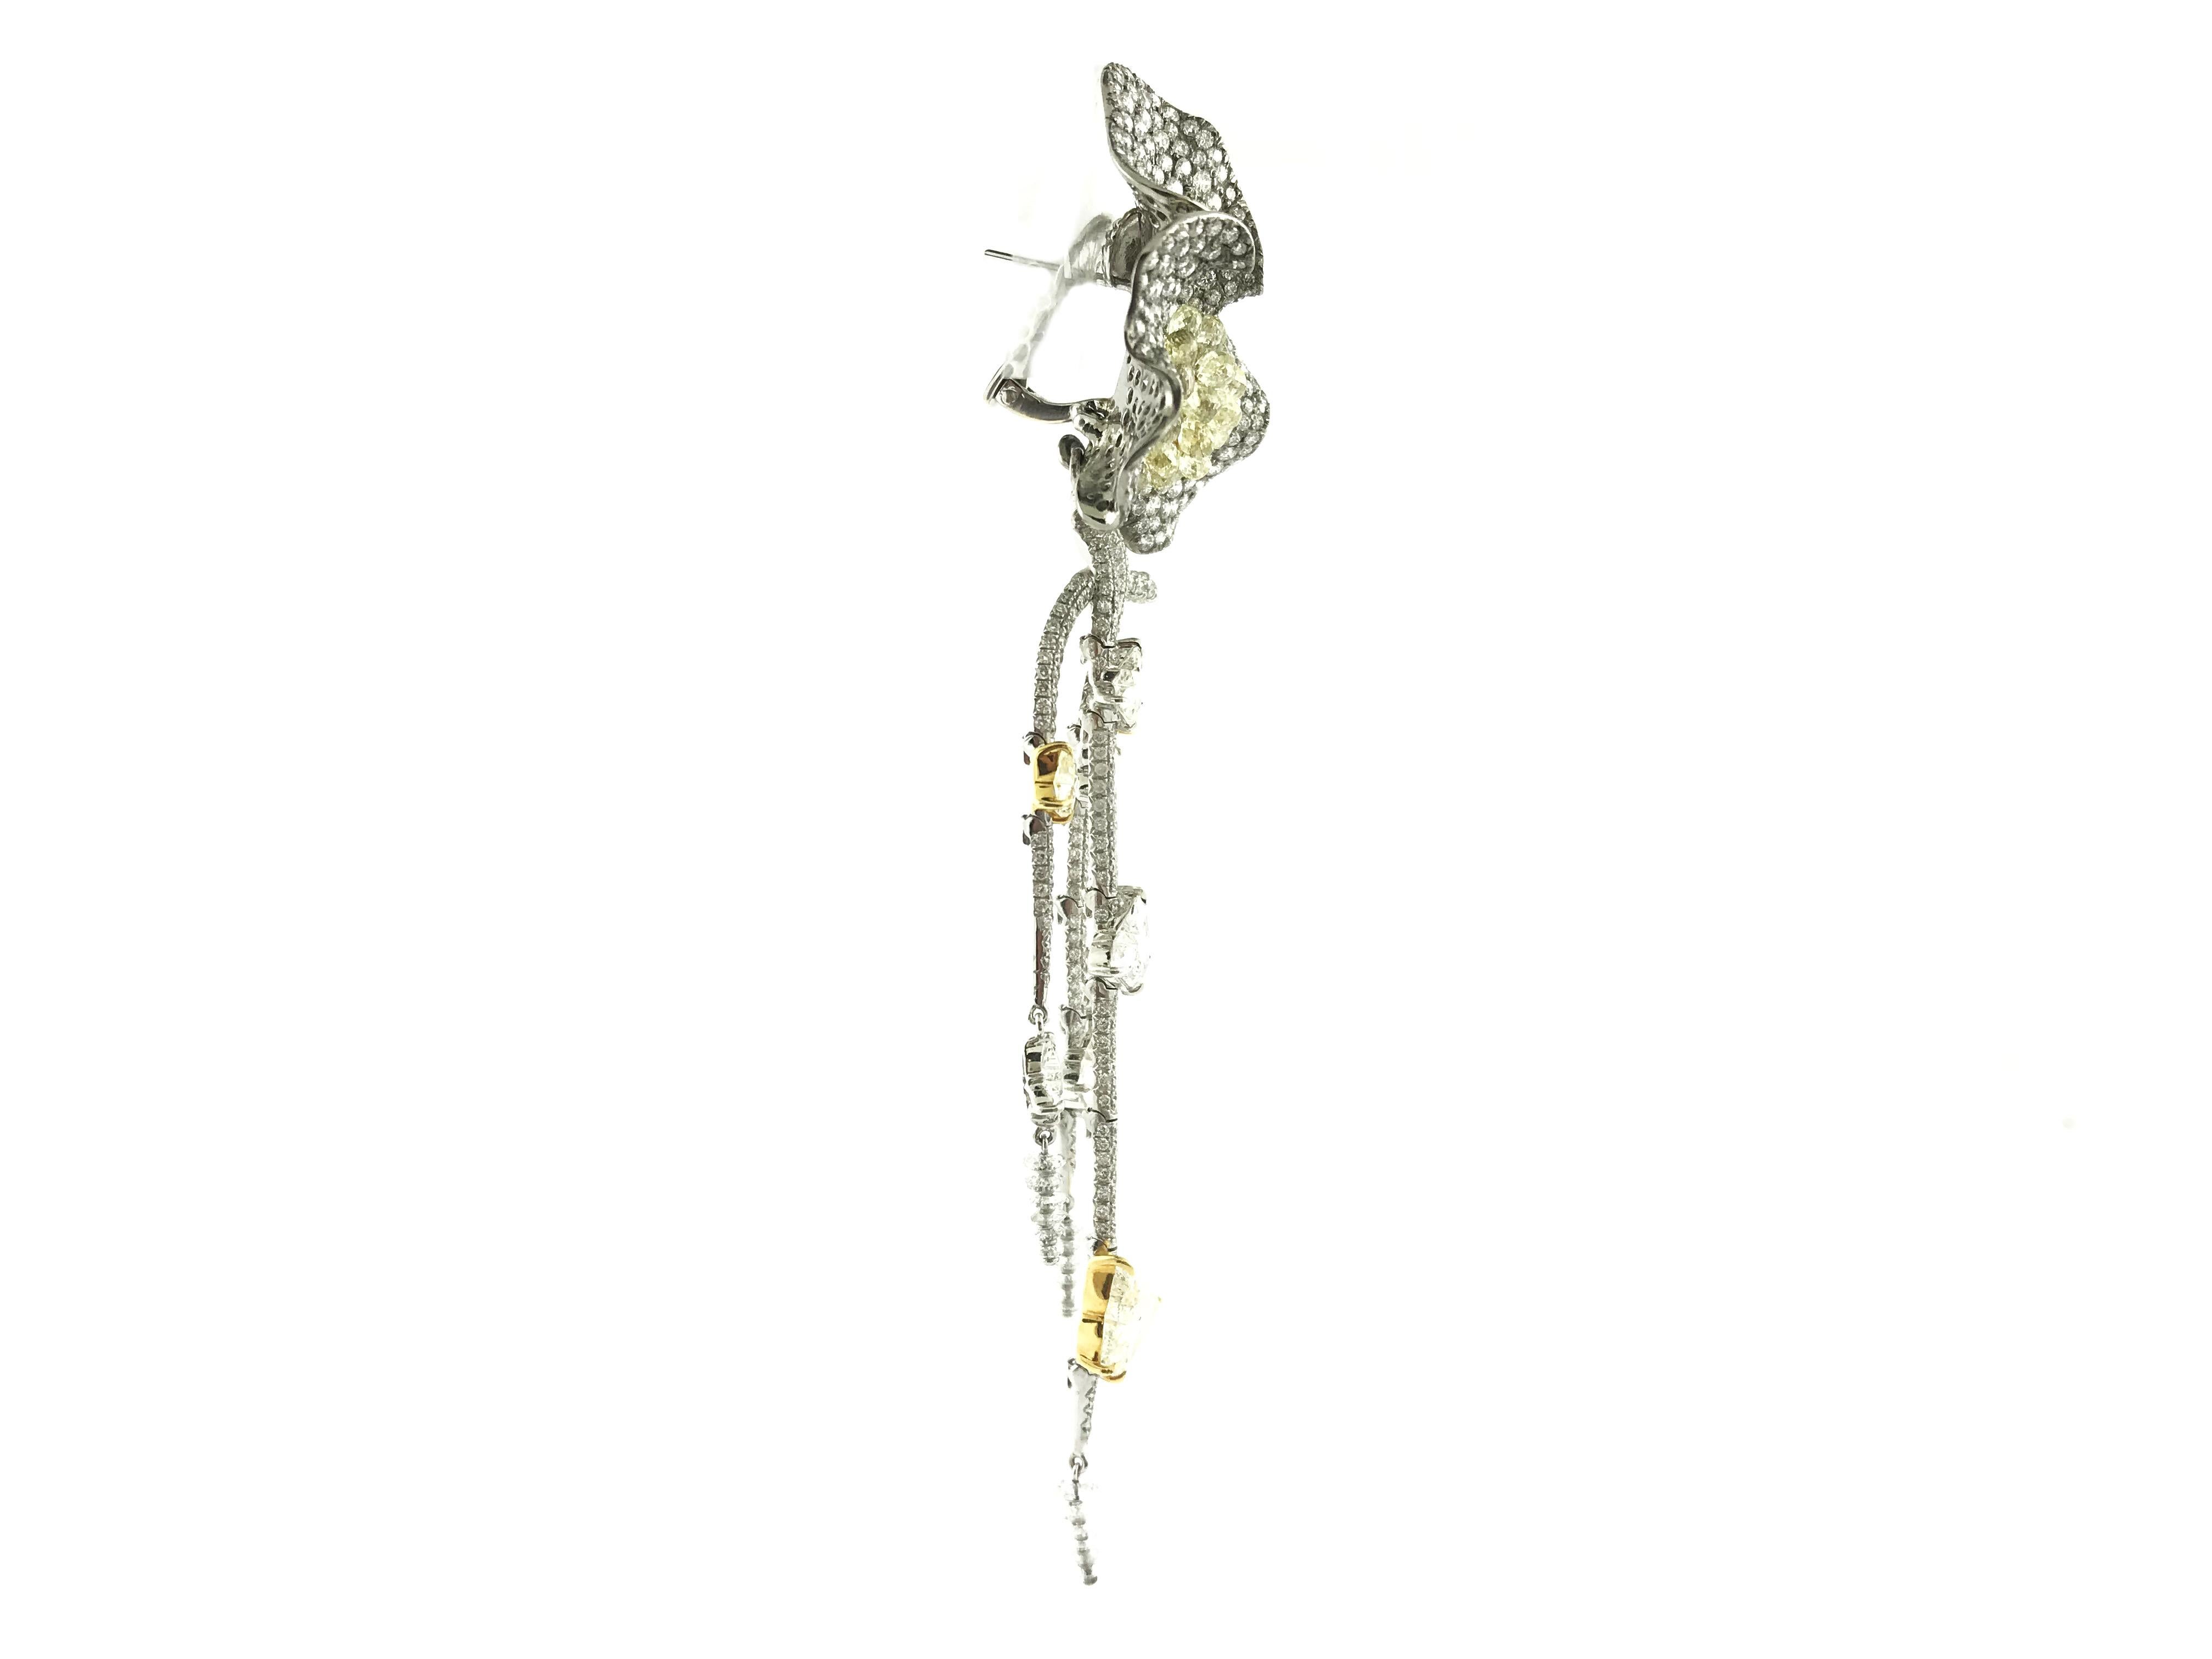 From our award winning COUTURE line. Designed by Samir Bhansali, this one of a kind detachable earring is made using titanium, a material that is considered avant garde and is known to be as light as a feather. Titanium is difficult to work with, so